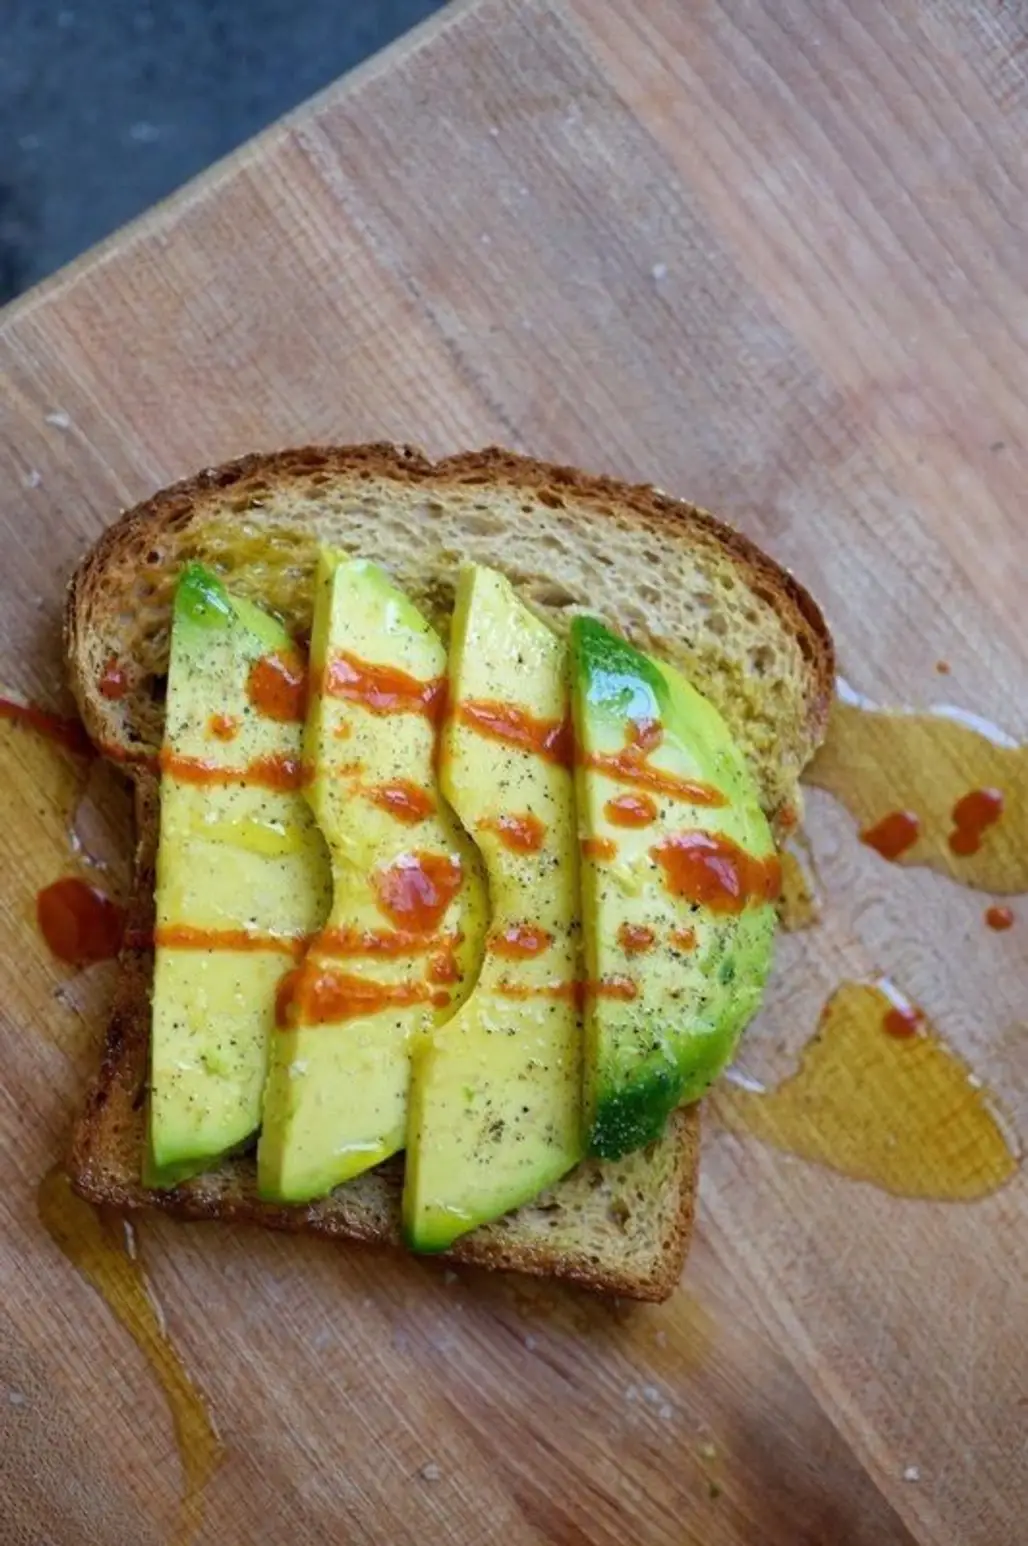 Avocado with a Little Salt, Pepper, and Hot Sauce